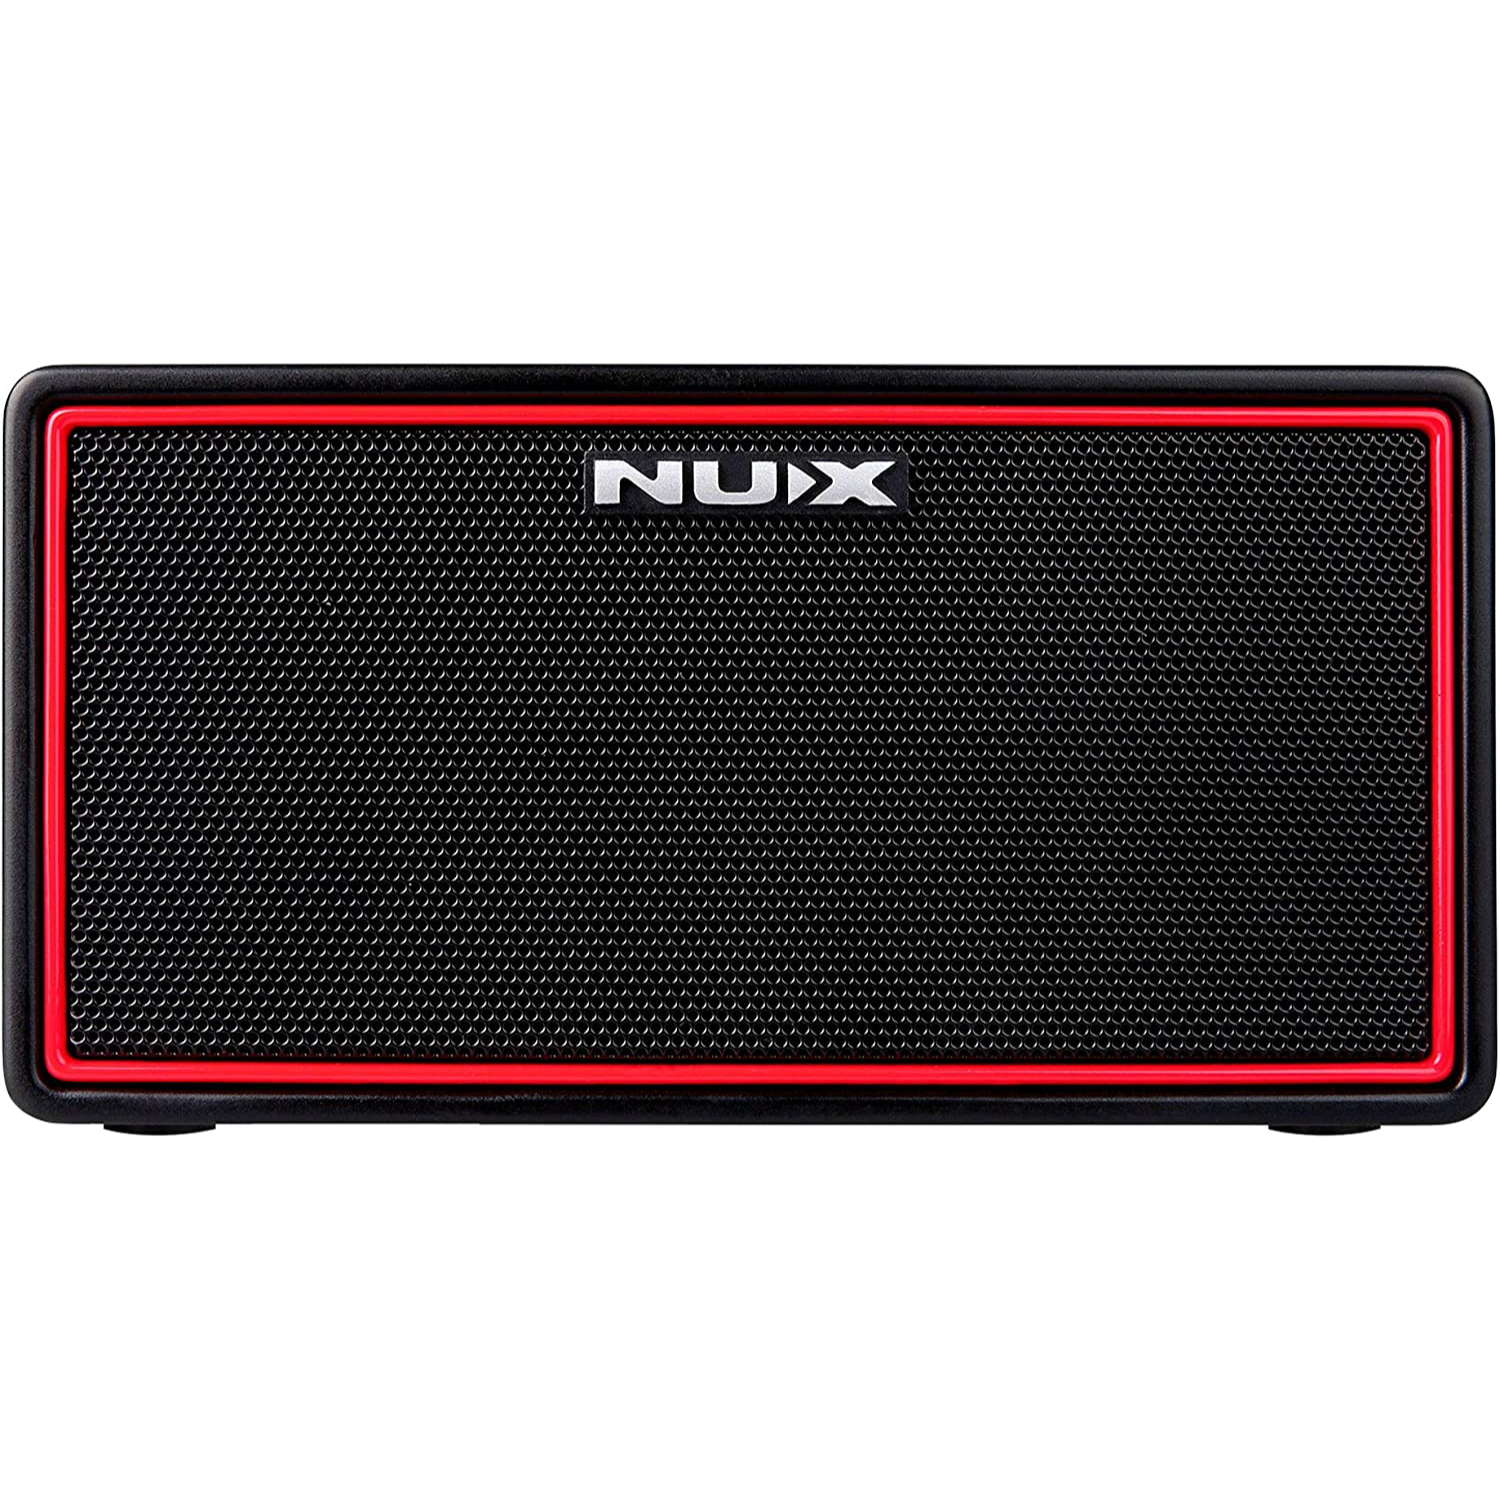 NUX Mighty Air - Wireless Stereo Modeling Guitar/Bass Amplifier w